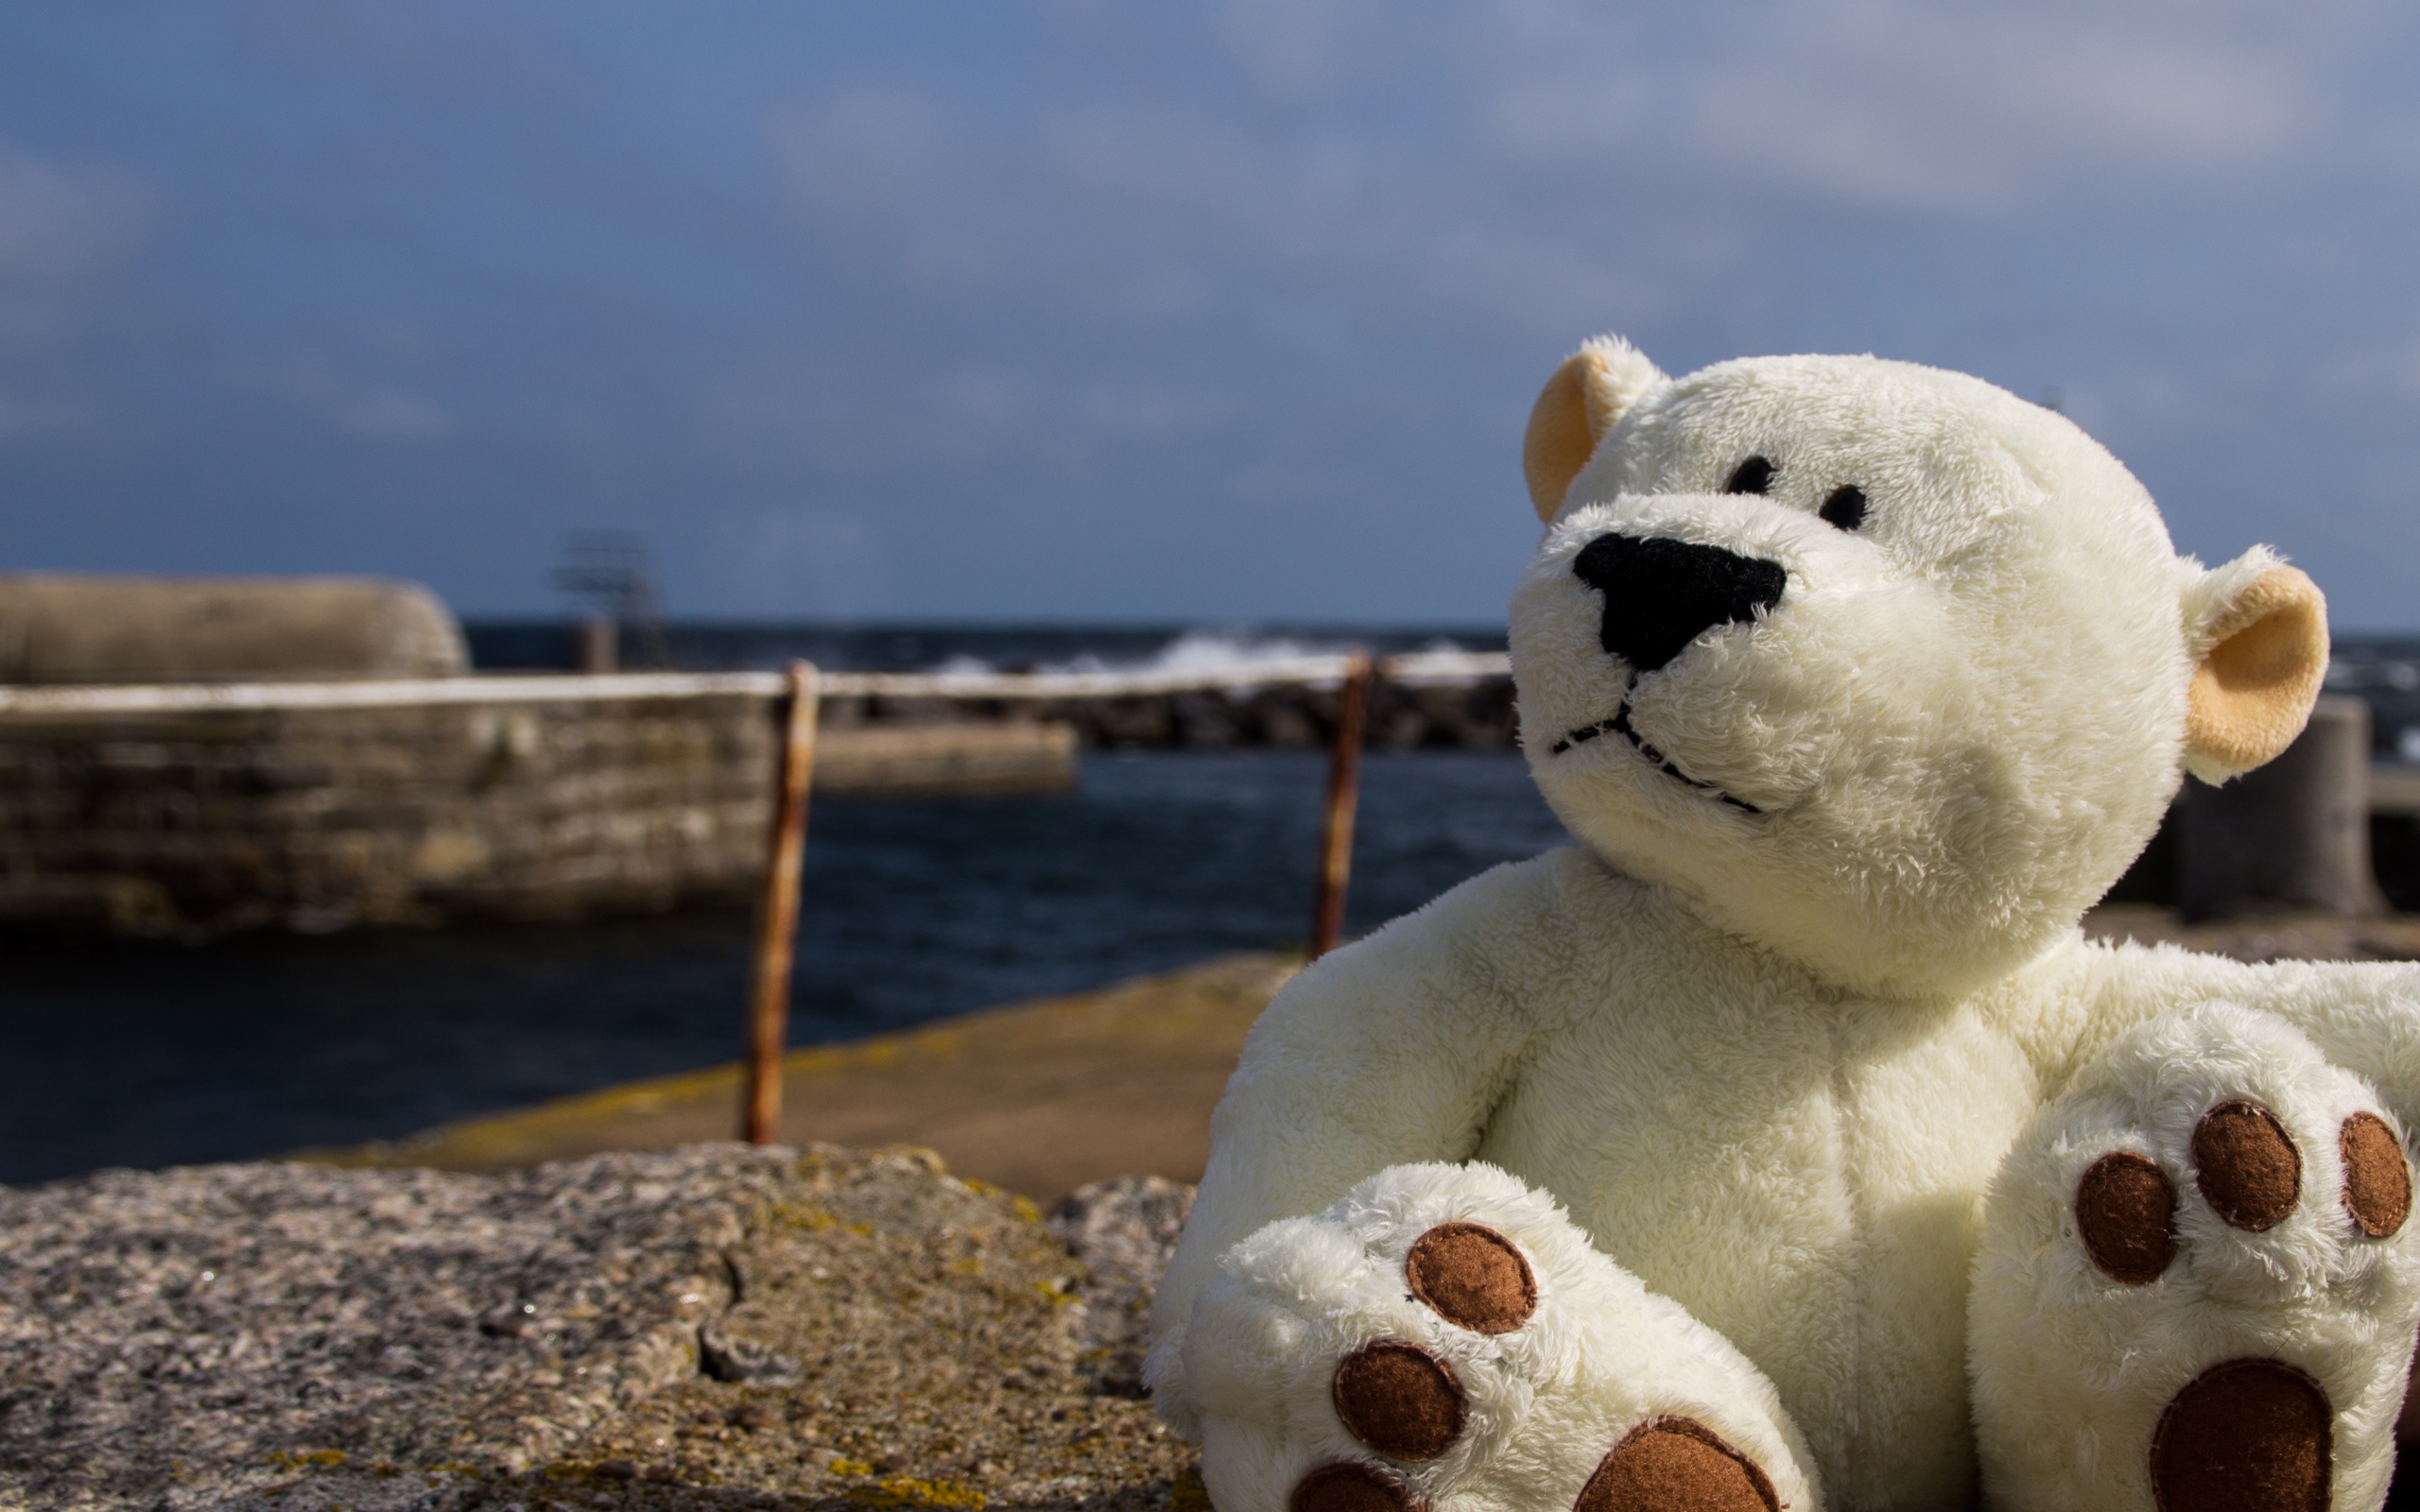 White teddy bear sits on a stone by the sea